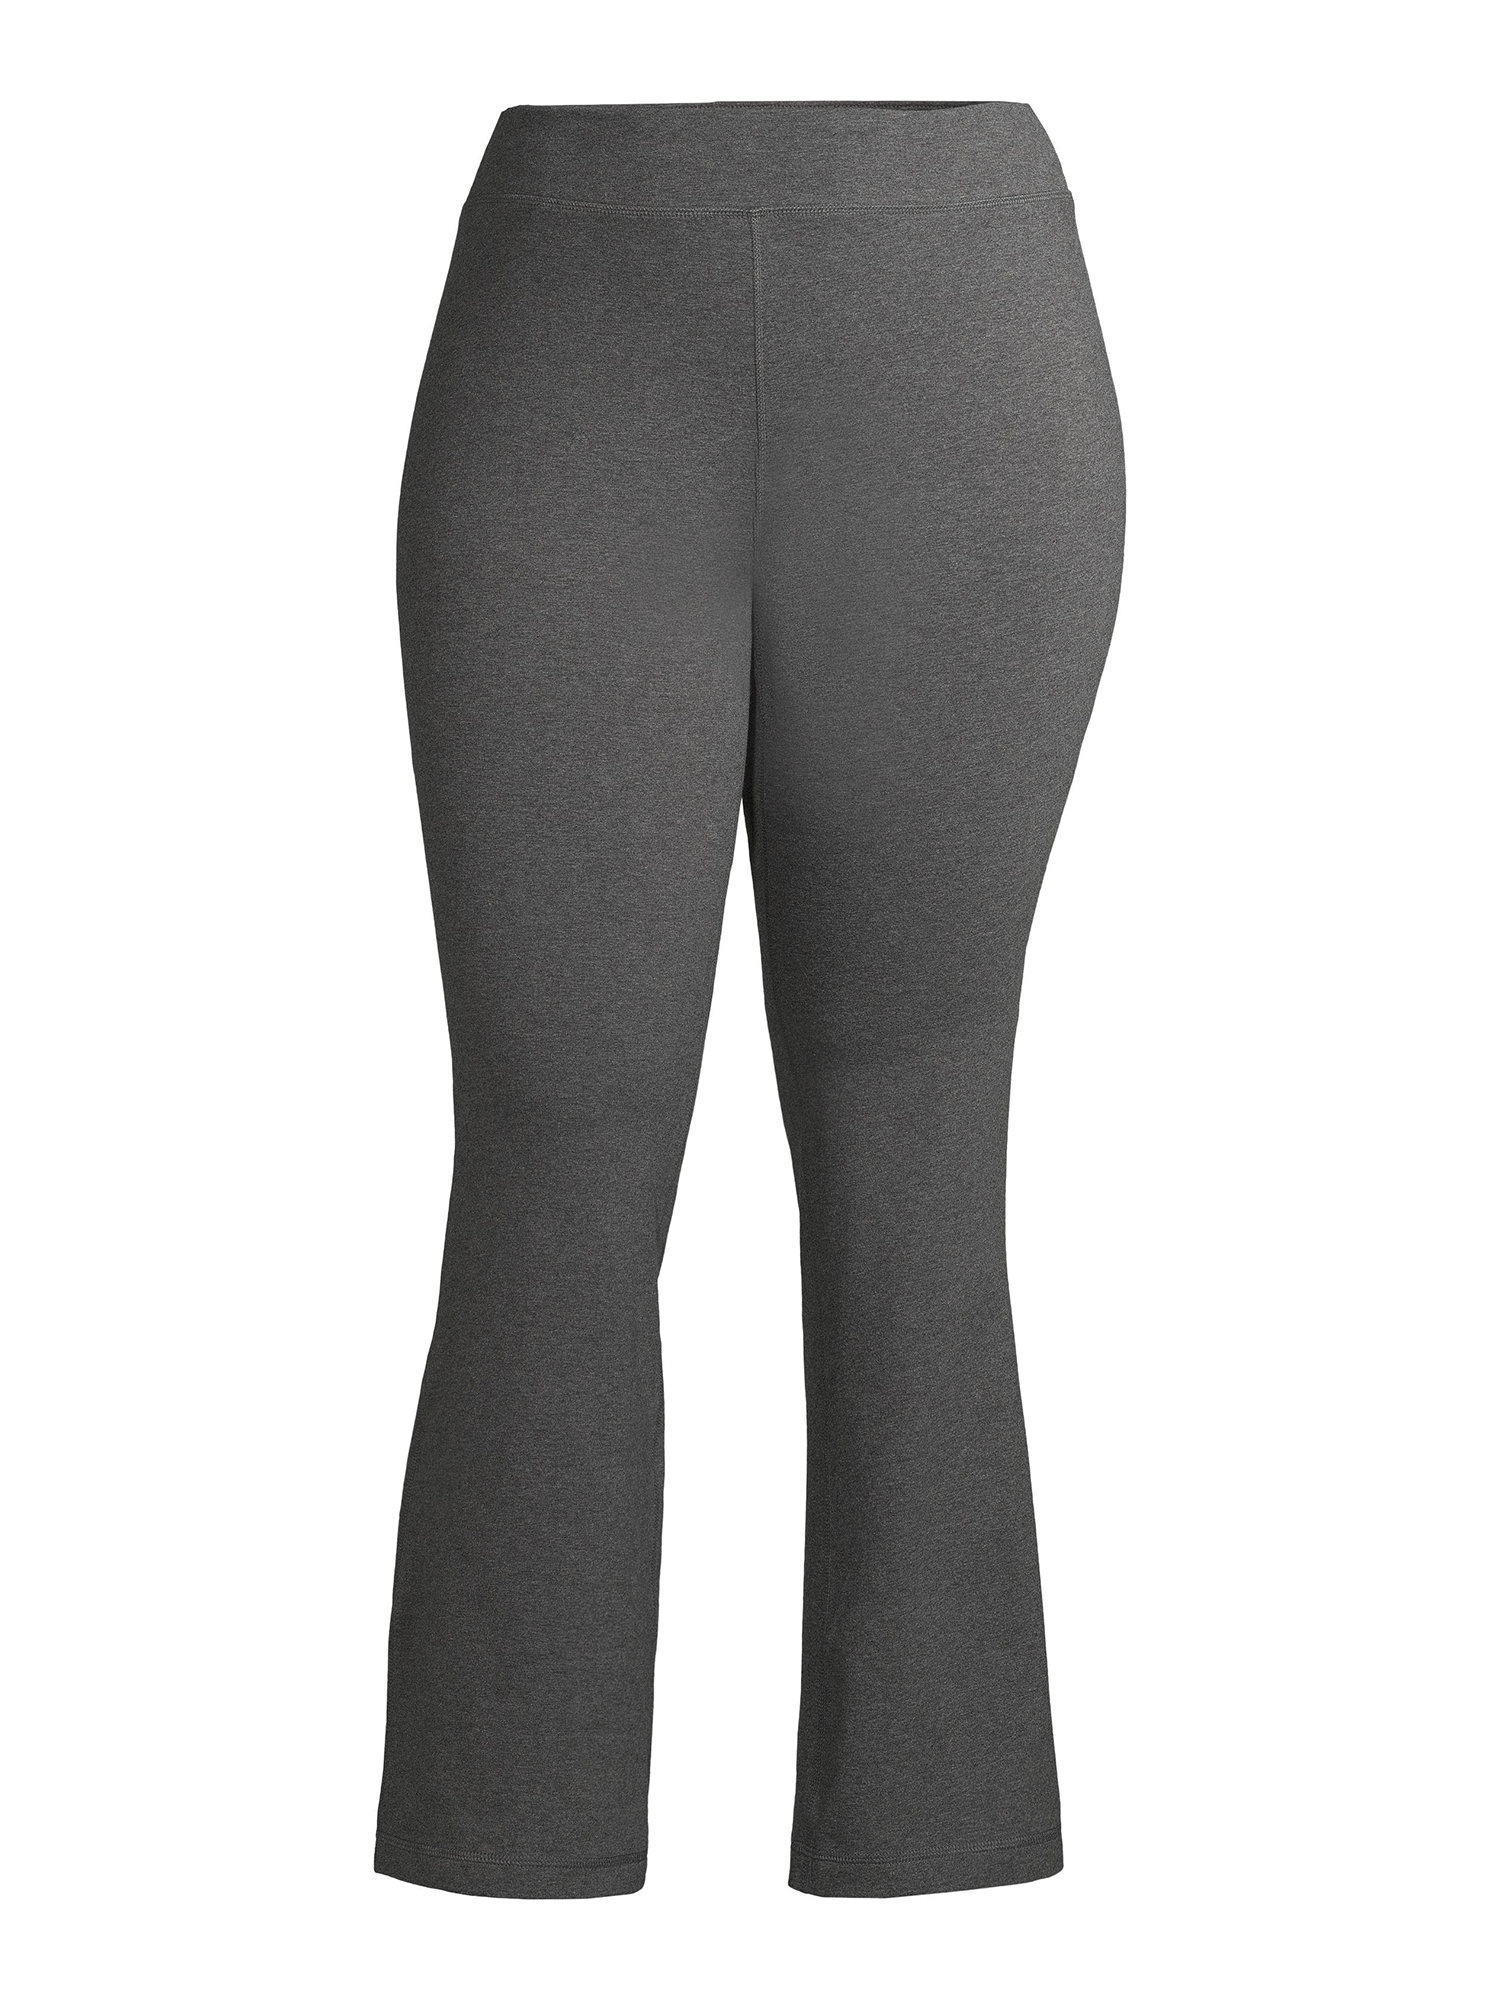 Athletic Works Women’s and Women's Plus Stretch Cotton Blend Straight Leg Pants - image 4 of 7